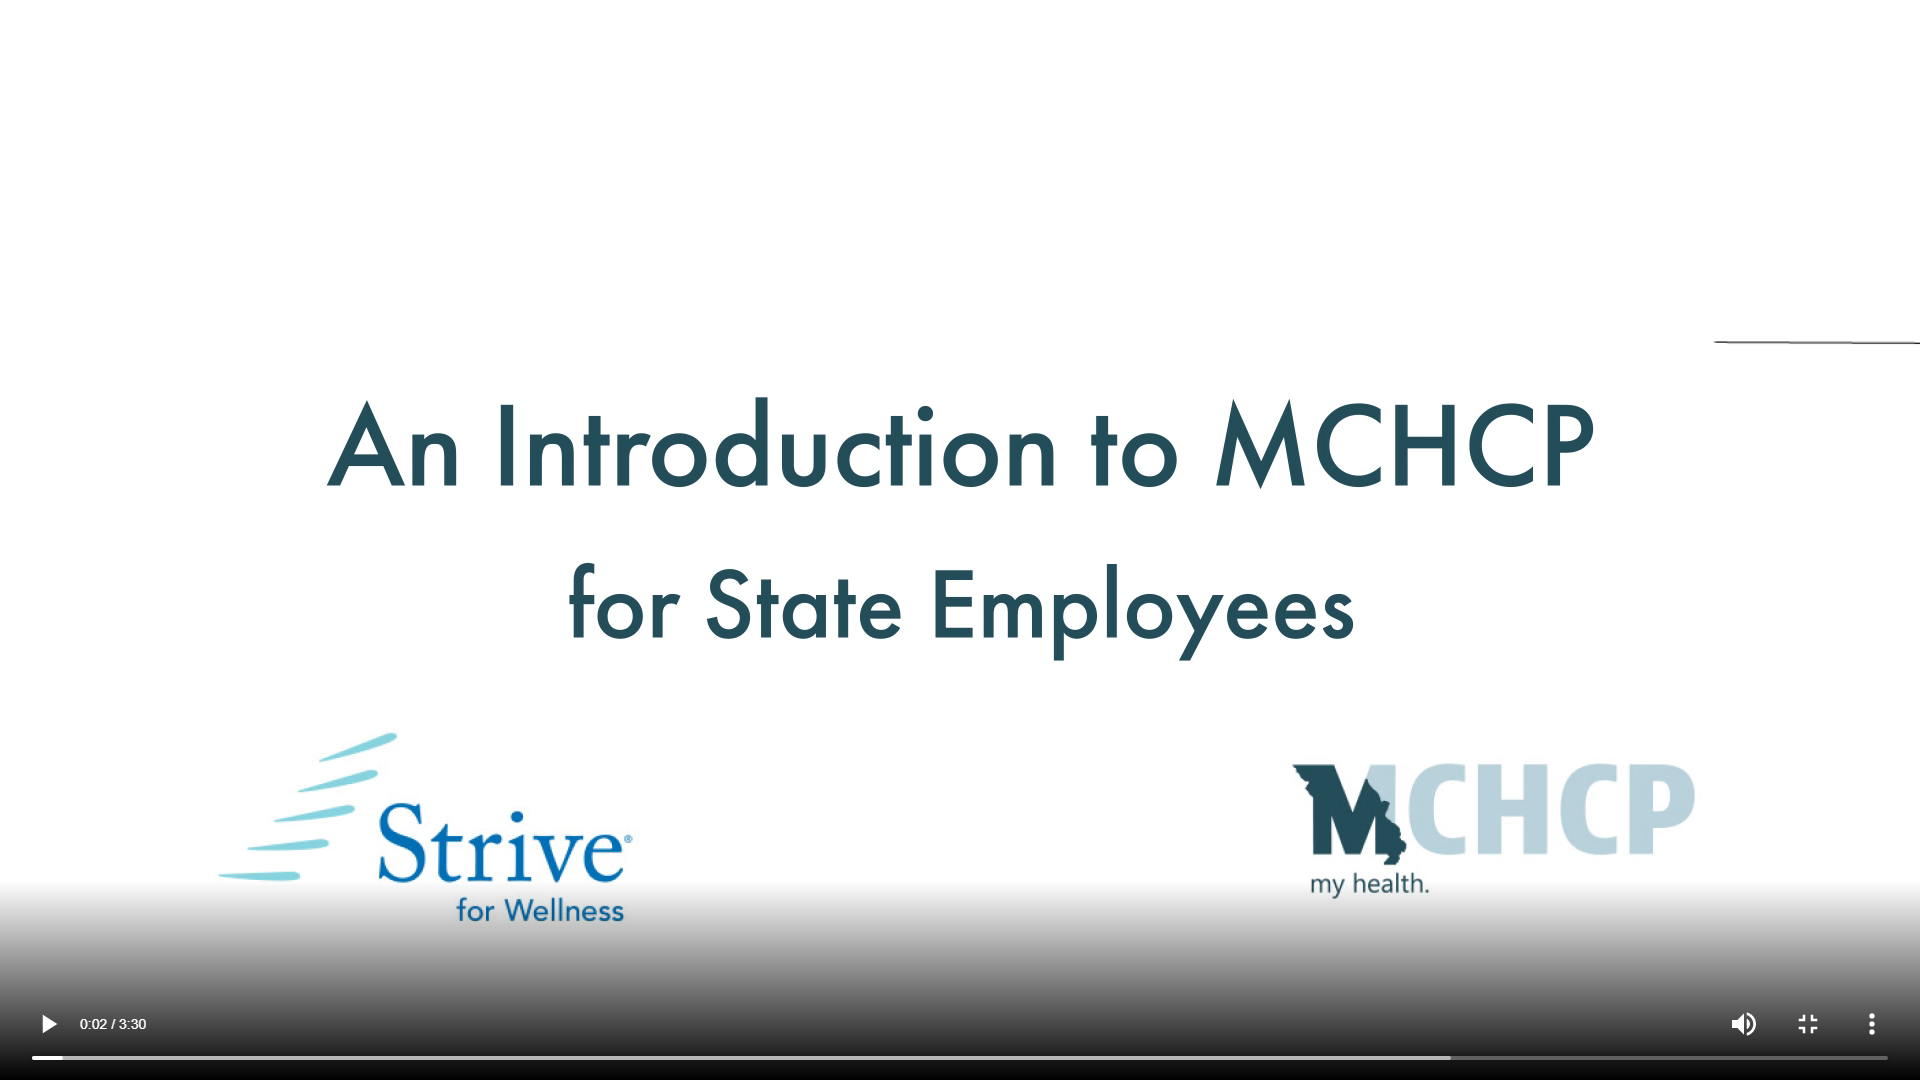 An introduction to MCHCP video